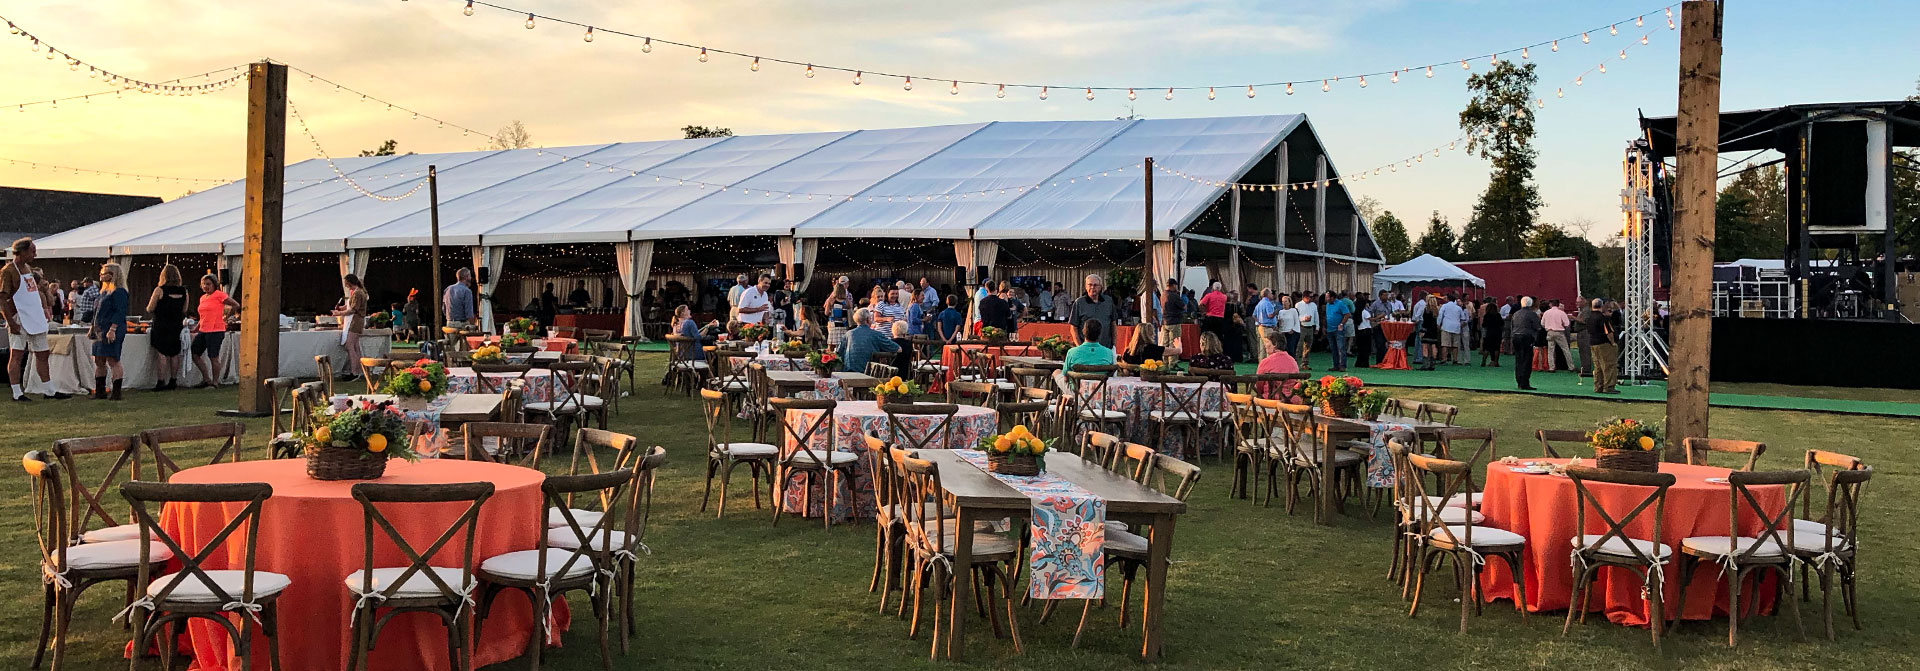 Chattanooga Tent and Event Solutions is the best choice for Chattanooga event rentals, from tents, to tables and chairs, to china, and more!